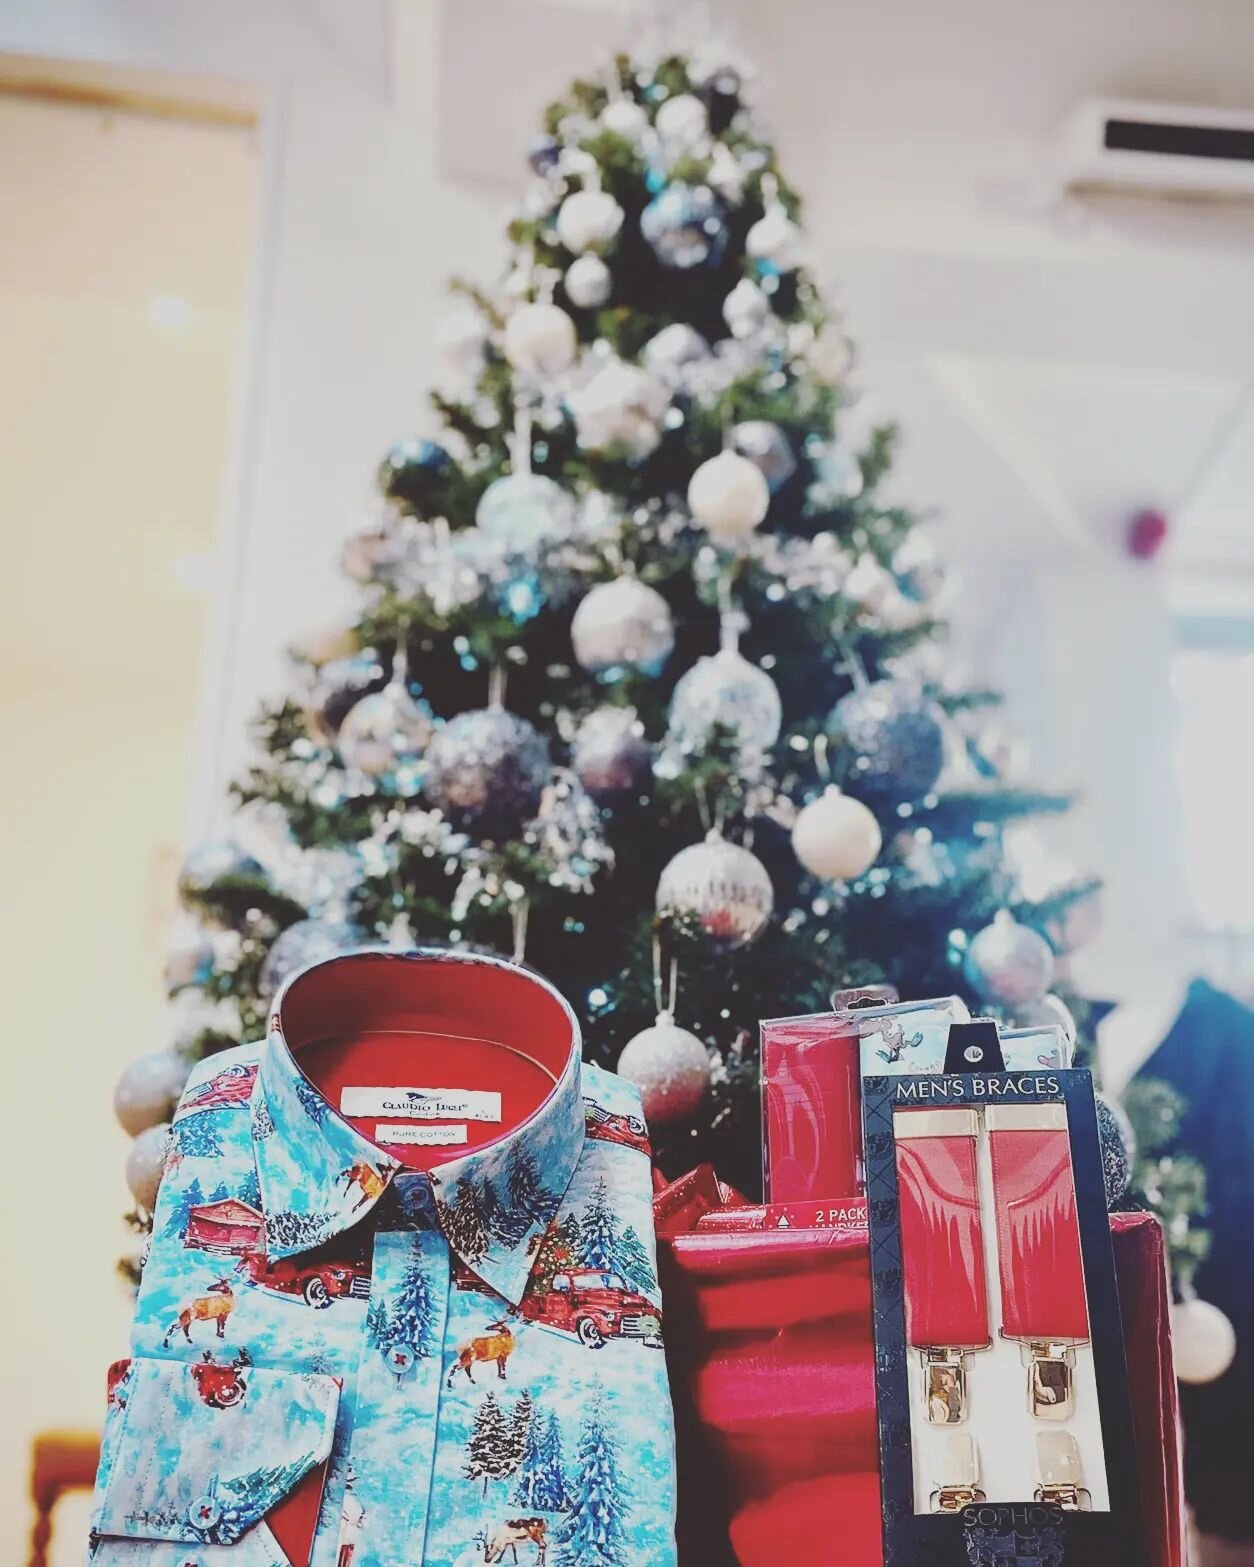 Open today until 5 to help you put some Christmas gifts under the tree. #symondsofhereford #hereford #menswear #christmasgiftideas #christmaspresents #christmasshopping #shoplocal #shopindependent